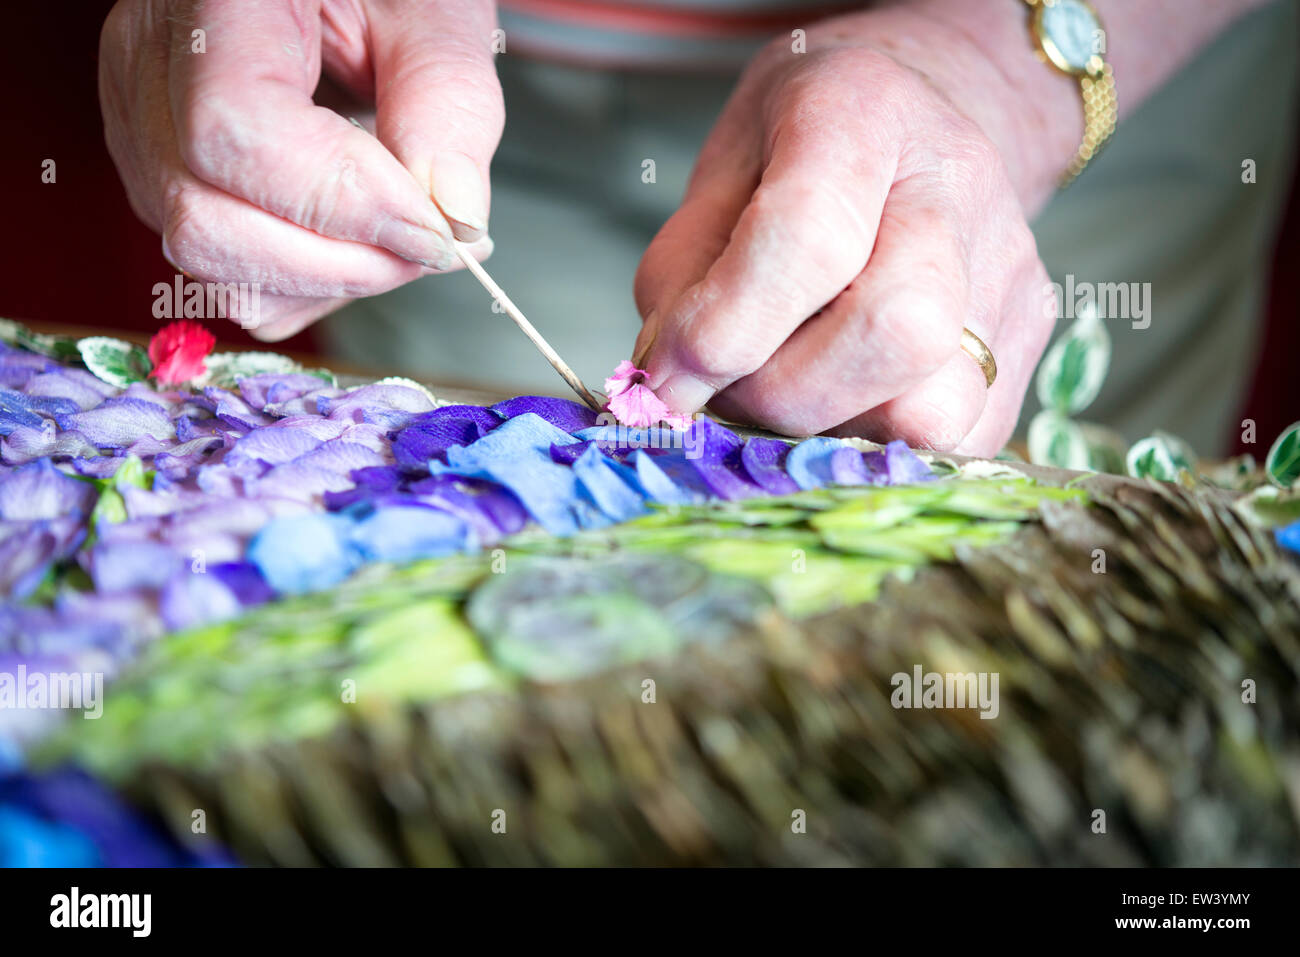 Holywell, UK. 17th June, 2015. Margaret Perryman decorates a wooden frame with thousands of individual flower petals and seeds to form an intricate mosaic picture that is displayed by the ancient well at the Church of St John the Baptist in the riverside village of Holywell, Cambridgeshire UK. The painstaking task is carried out by a team of local volunteers and starts with the design being pricked out in the clay, followed by the placing of individual petals pressed into the clay with a cocktail stick. Credit:  Julian Eales/Alamy Live News Stock Photo